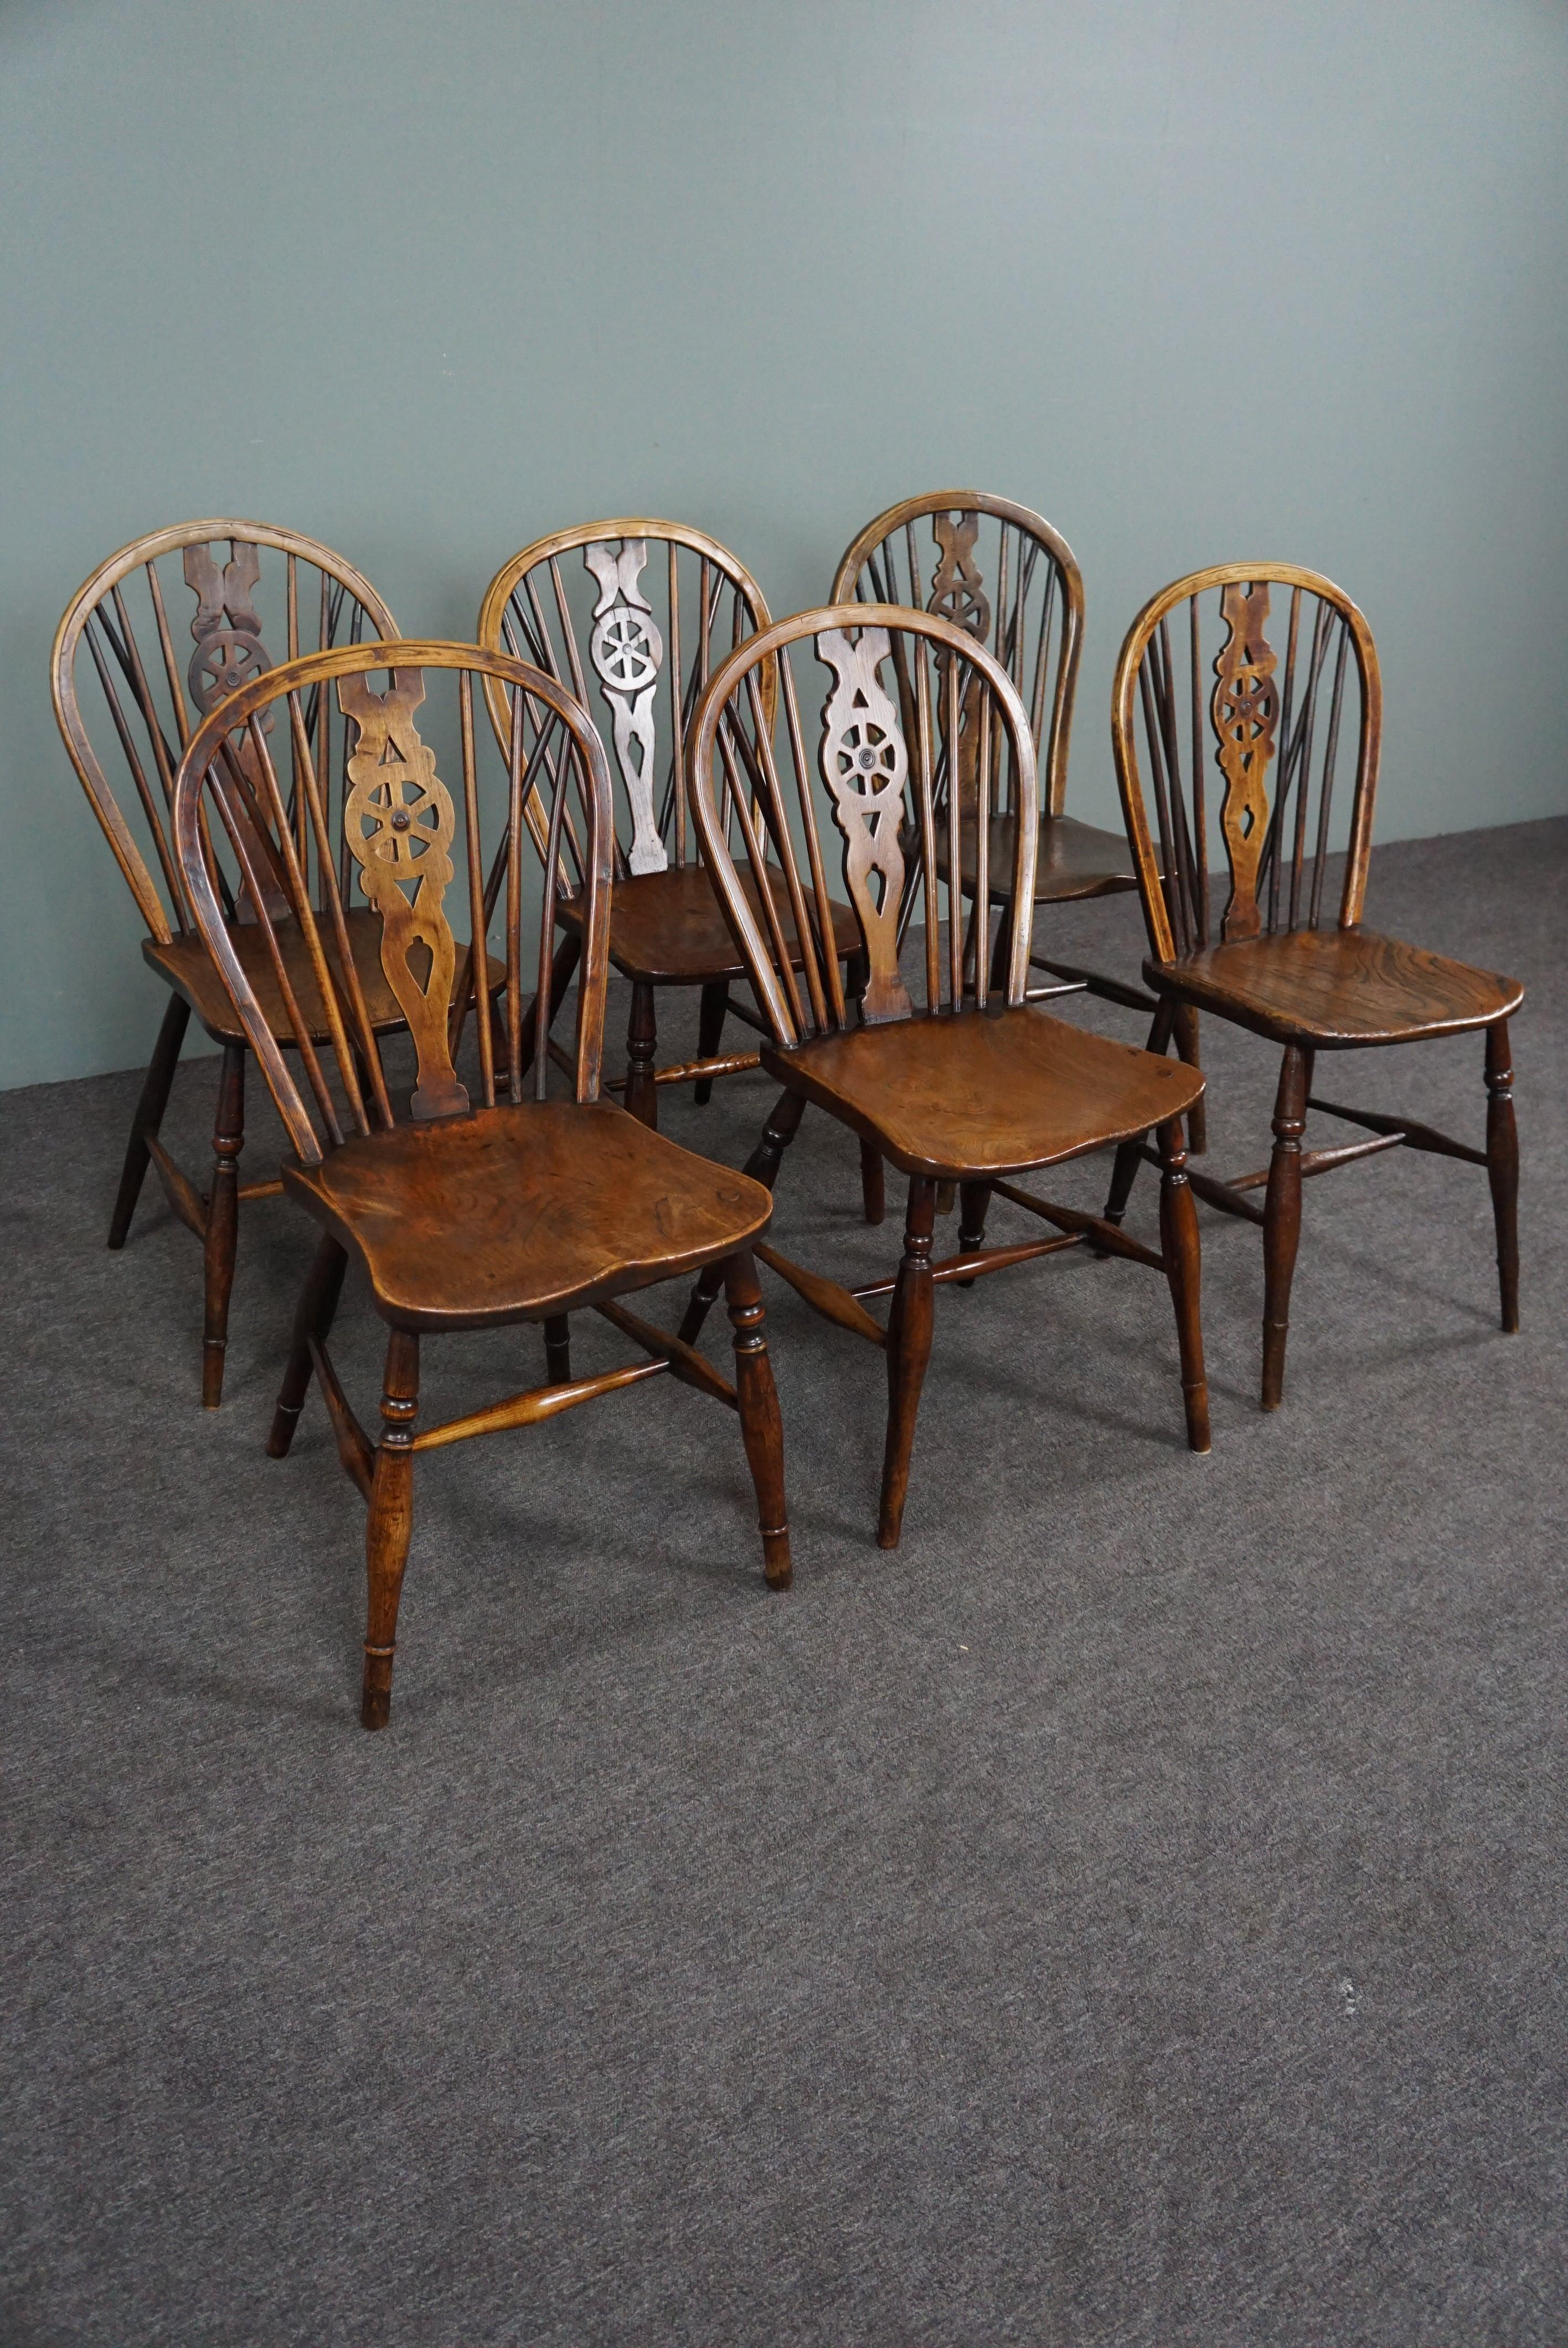 Offered this beautiful antique set, made of solid wood with a beautiful patina.

This beautiful set of antique dining room chairs comes from the 18th century and is made of solid wood with a beautiful patina. These chairs are not the same, but are